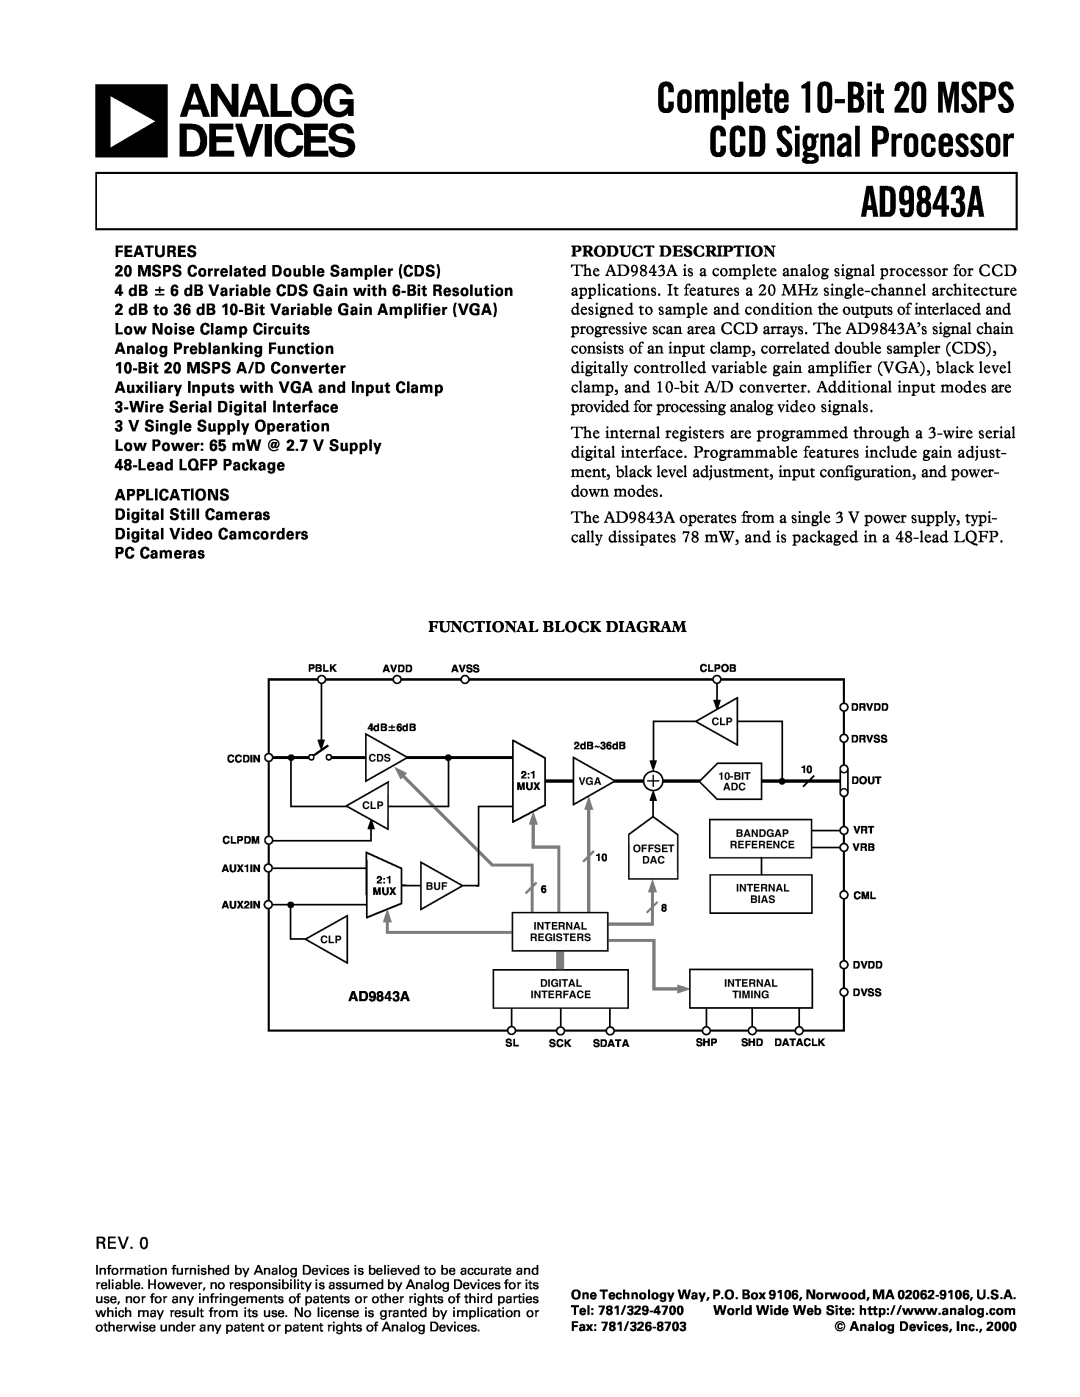 Analog Devices AD9843A manual Complete 10-Bit 20 MSPS, CCD Signal Processor 